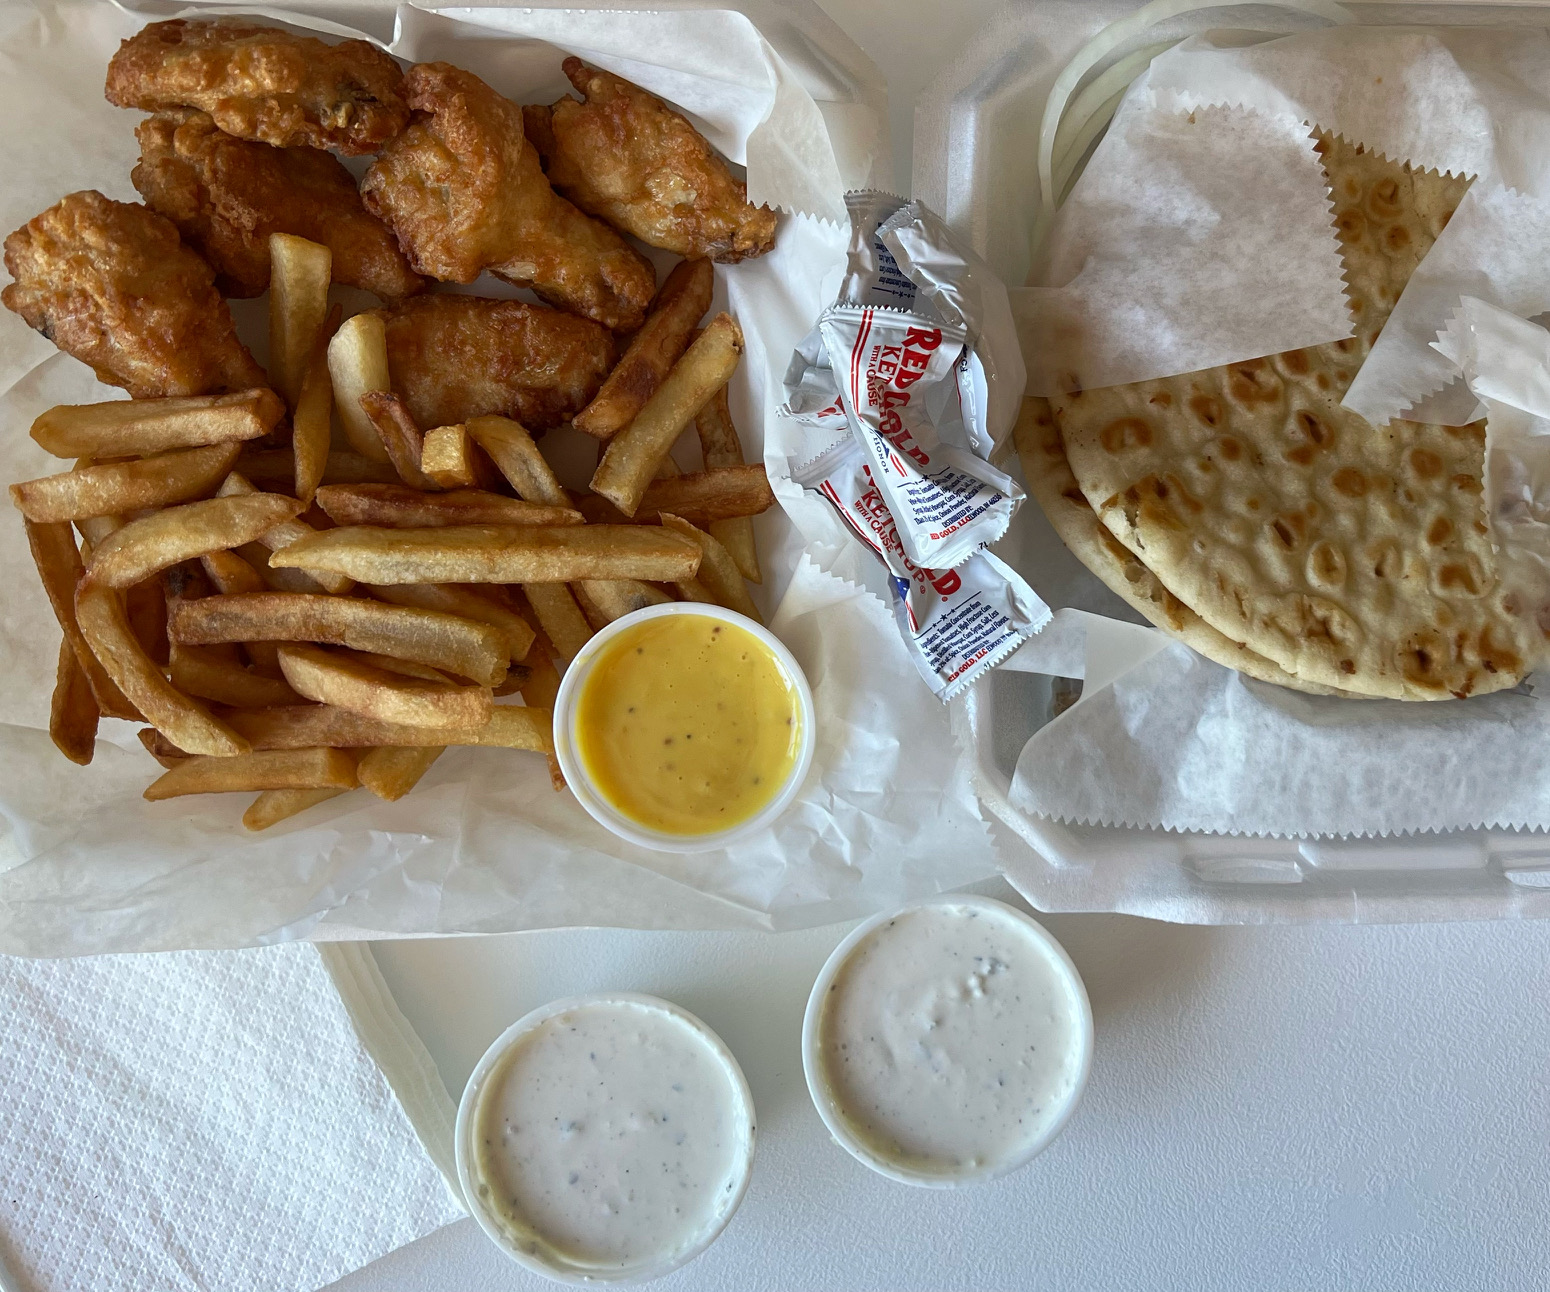 An overhead photo shows the author's lunch. On the left, a parchment paper lined styrofoam container has fried chicken wings with fries and a side sauce of honey mustard. The right has pitas over wrapped gyro meat with two cups of gyro sauce. Photo by Alyssa Buckley.